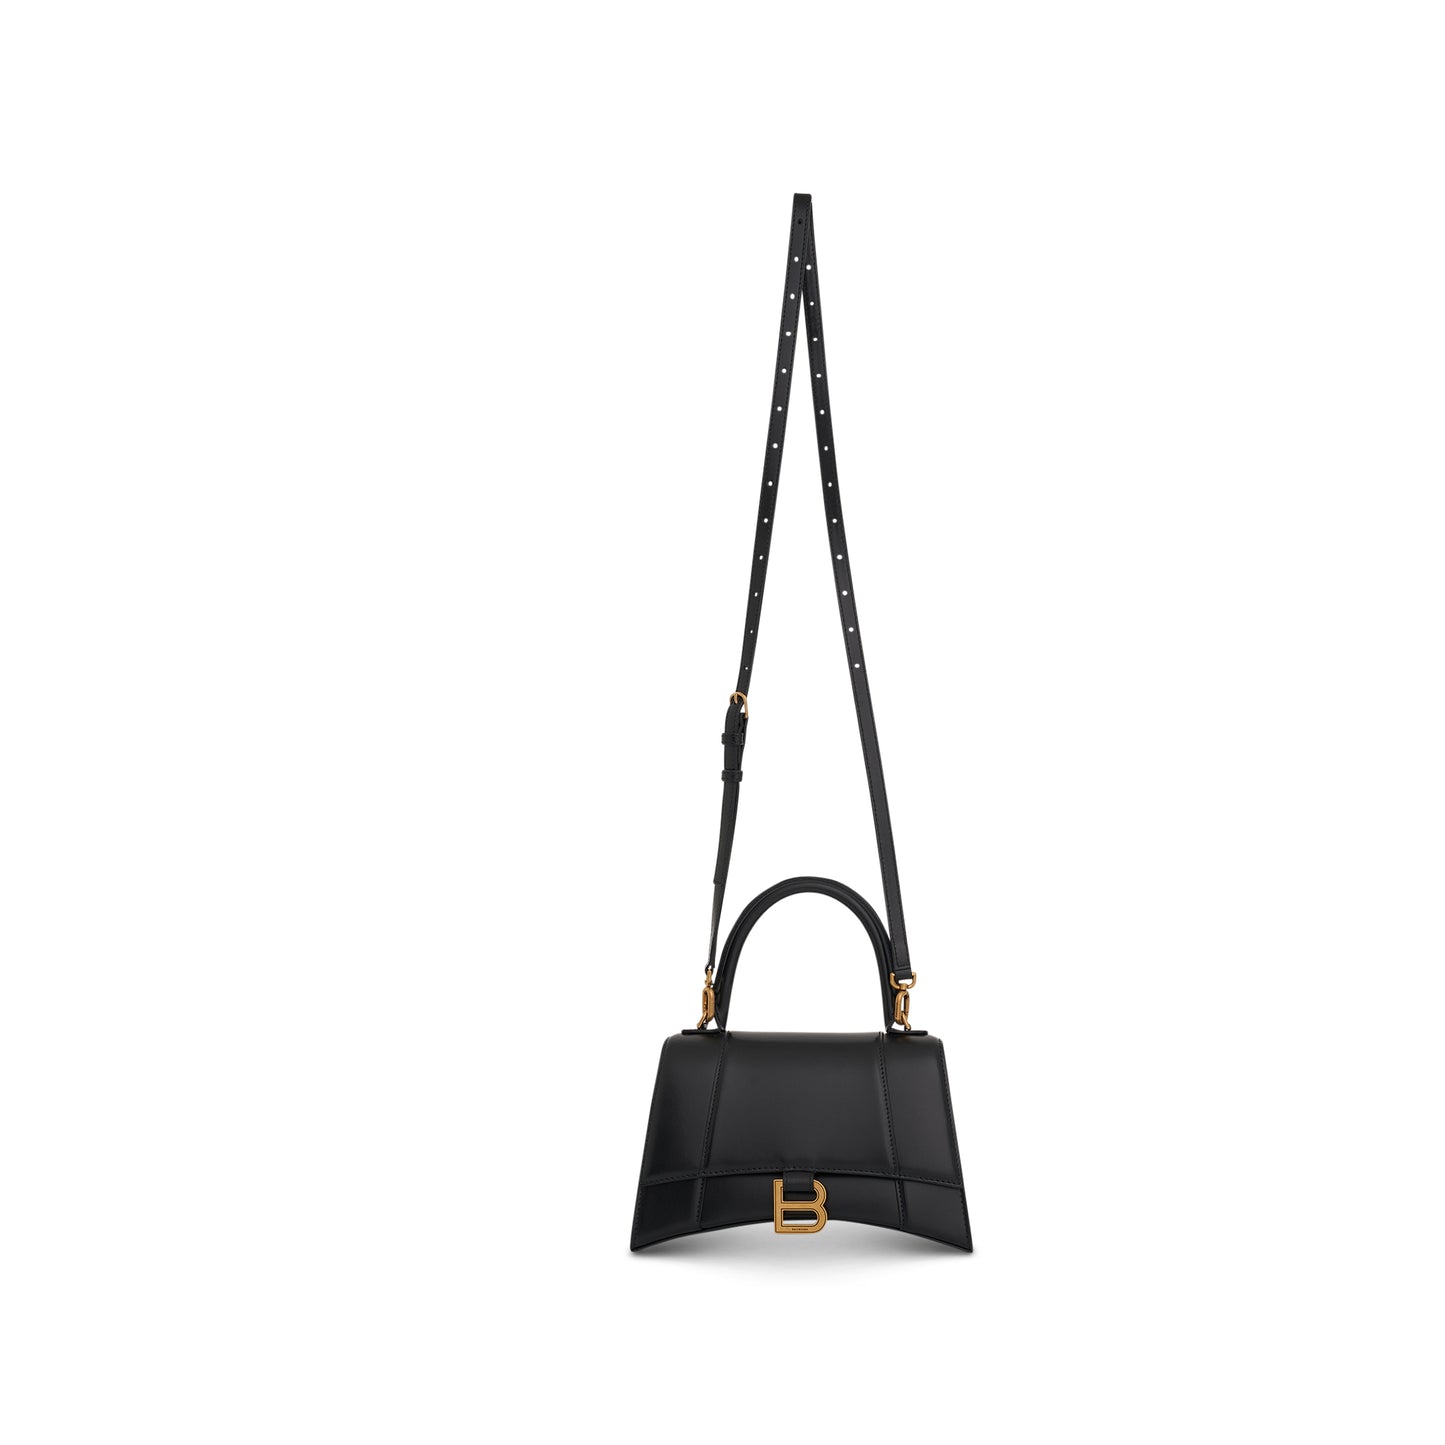 Hourglass Small Handbag in Box Calfskin in Black with Gold Plaque